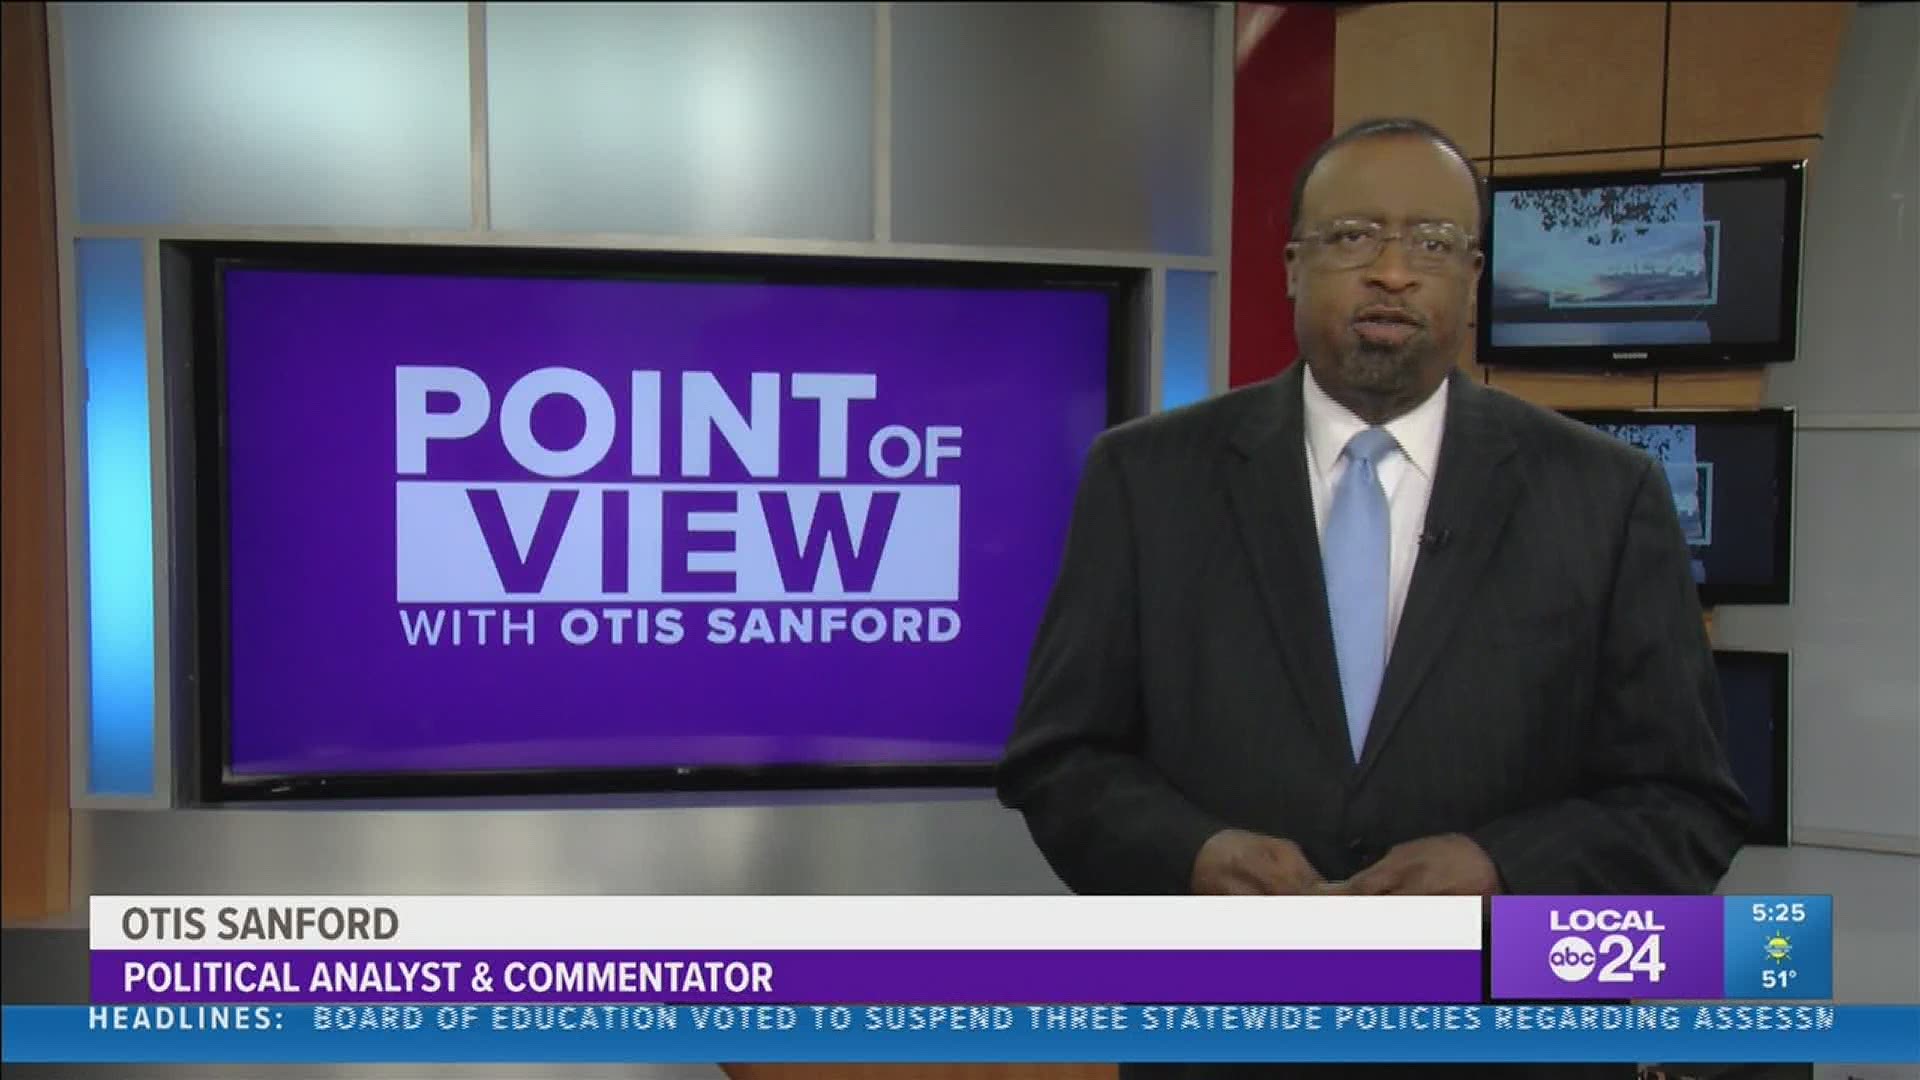 Local 24 news political analyst and commentator Otis Sanford shares his point of view on tax breaks for companies in Shelby County.